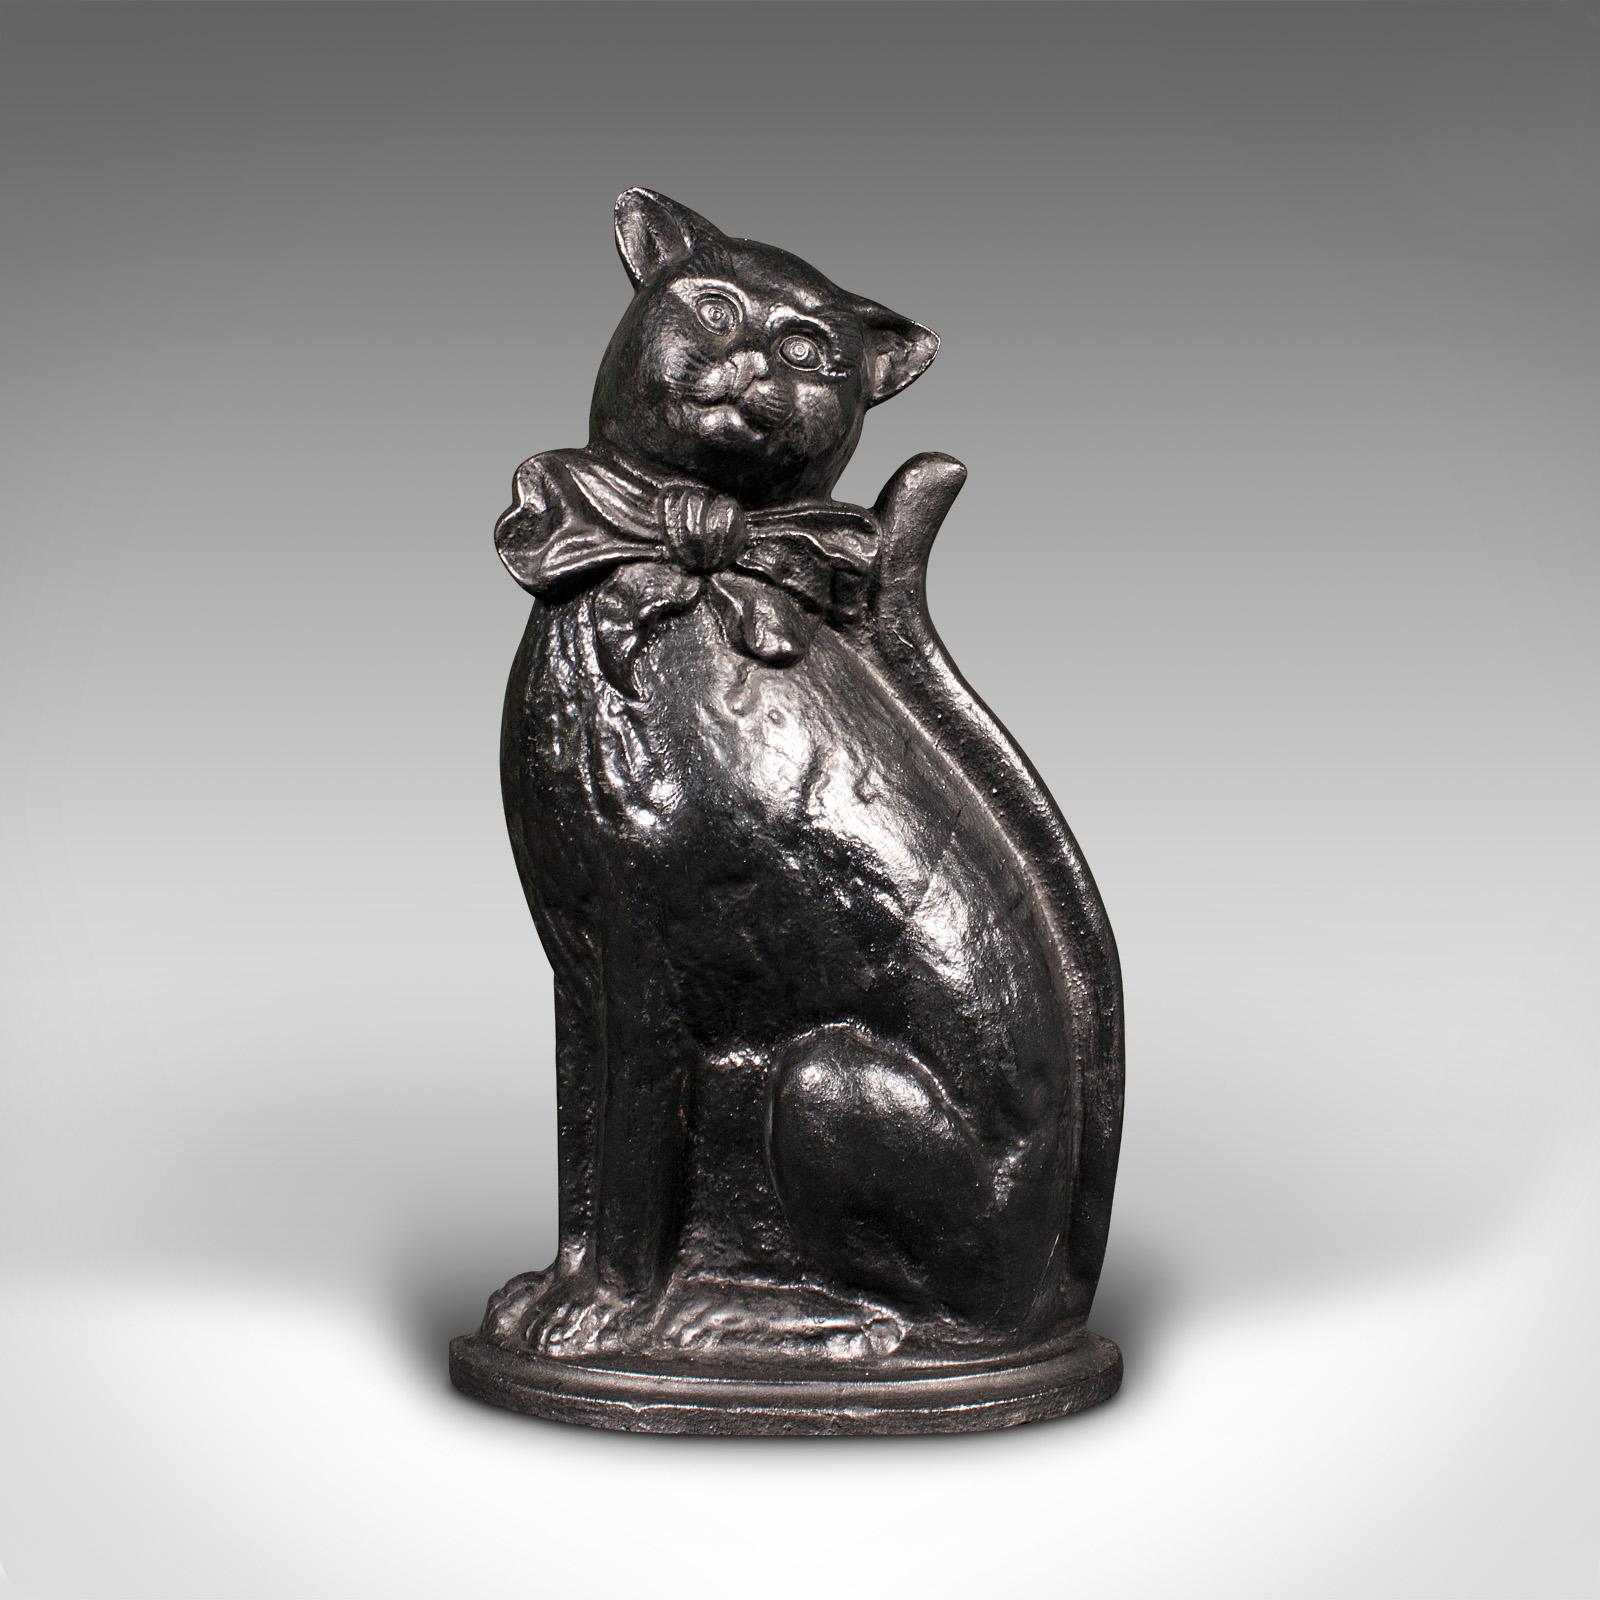 This is a vintage cat door stop. An English, cast iron decorative doorstopper, dating to the mid 20th century, circa 1950.

Invite this cheerful character into your home
Displays a desirable aged patina and in good order
Charmingly cast in